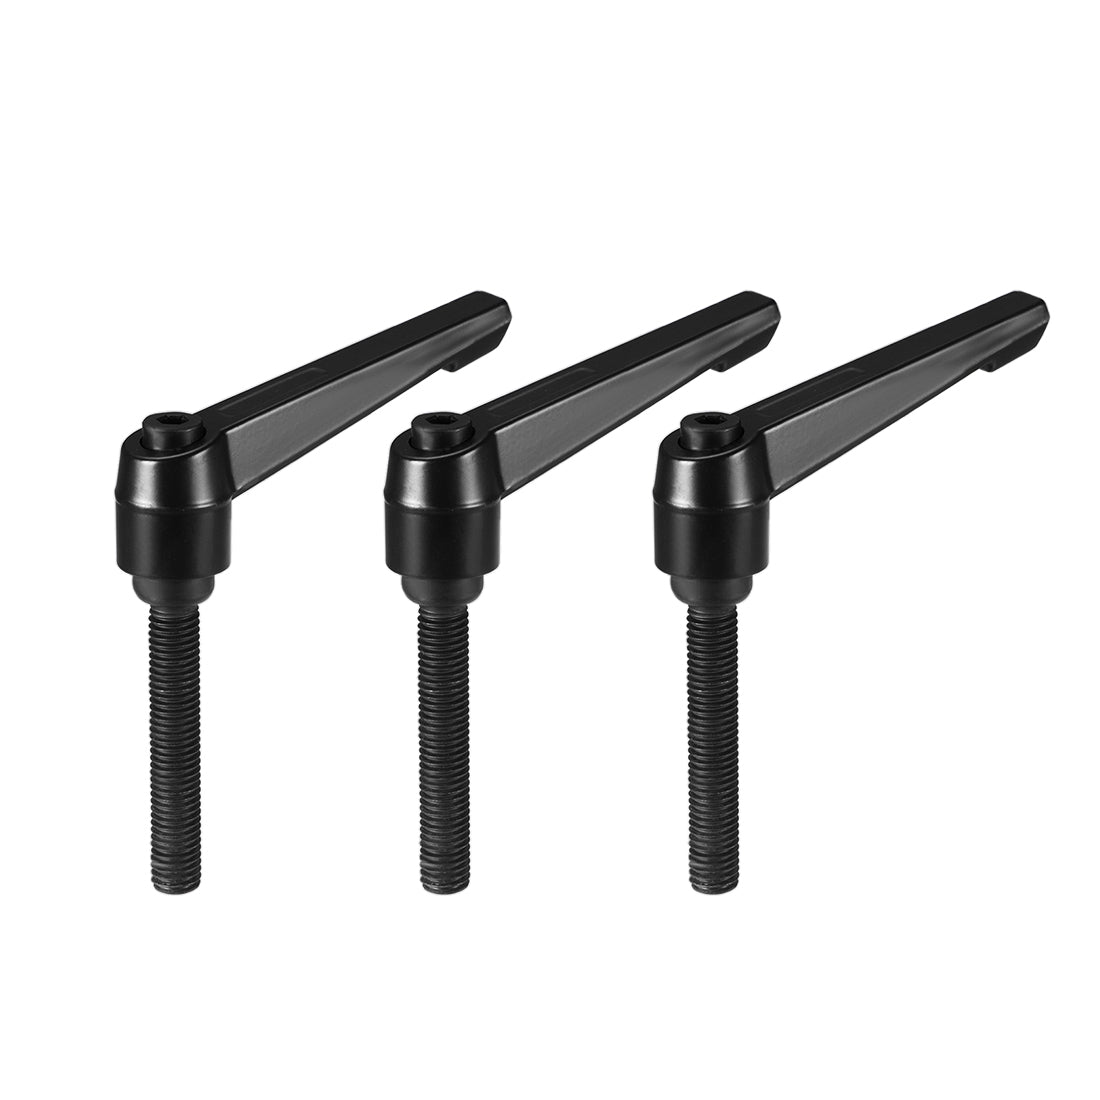 Uxcell Uxcell M8 x 40mm Handle Adjustable Clamping Lever Thread Push Button Ratchet Male Threaded Stud 3Pcs